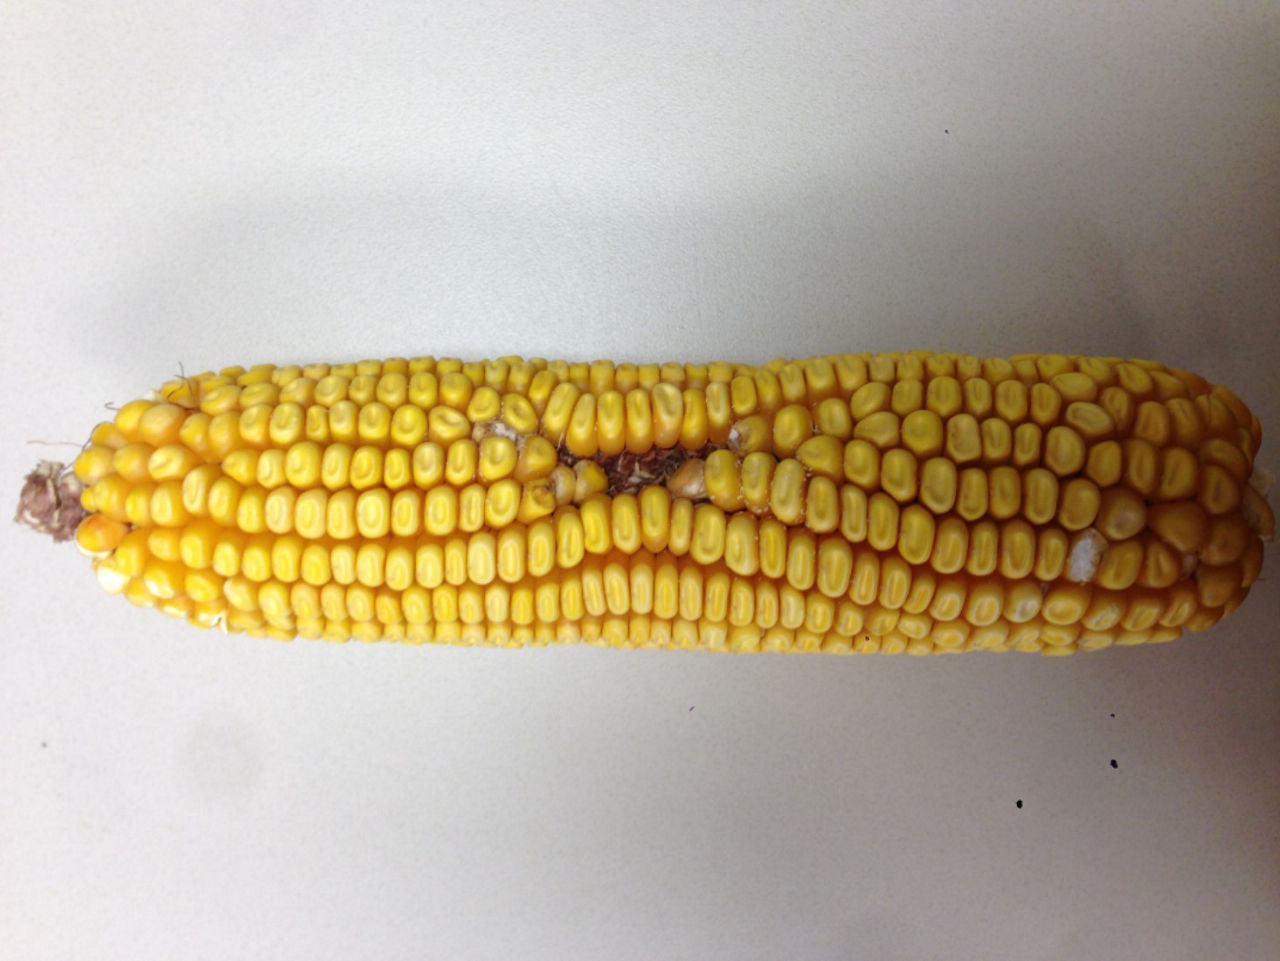 Figure 19. Kernel void resulting from hail stone strike.